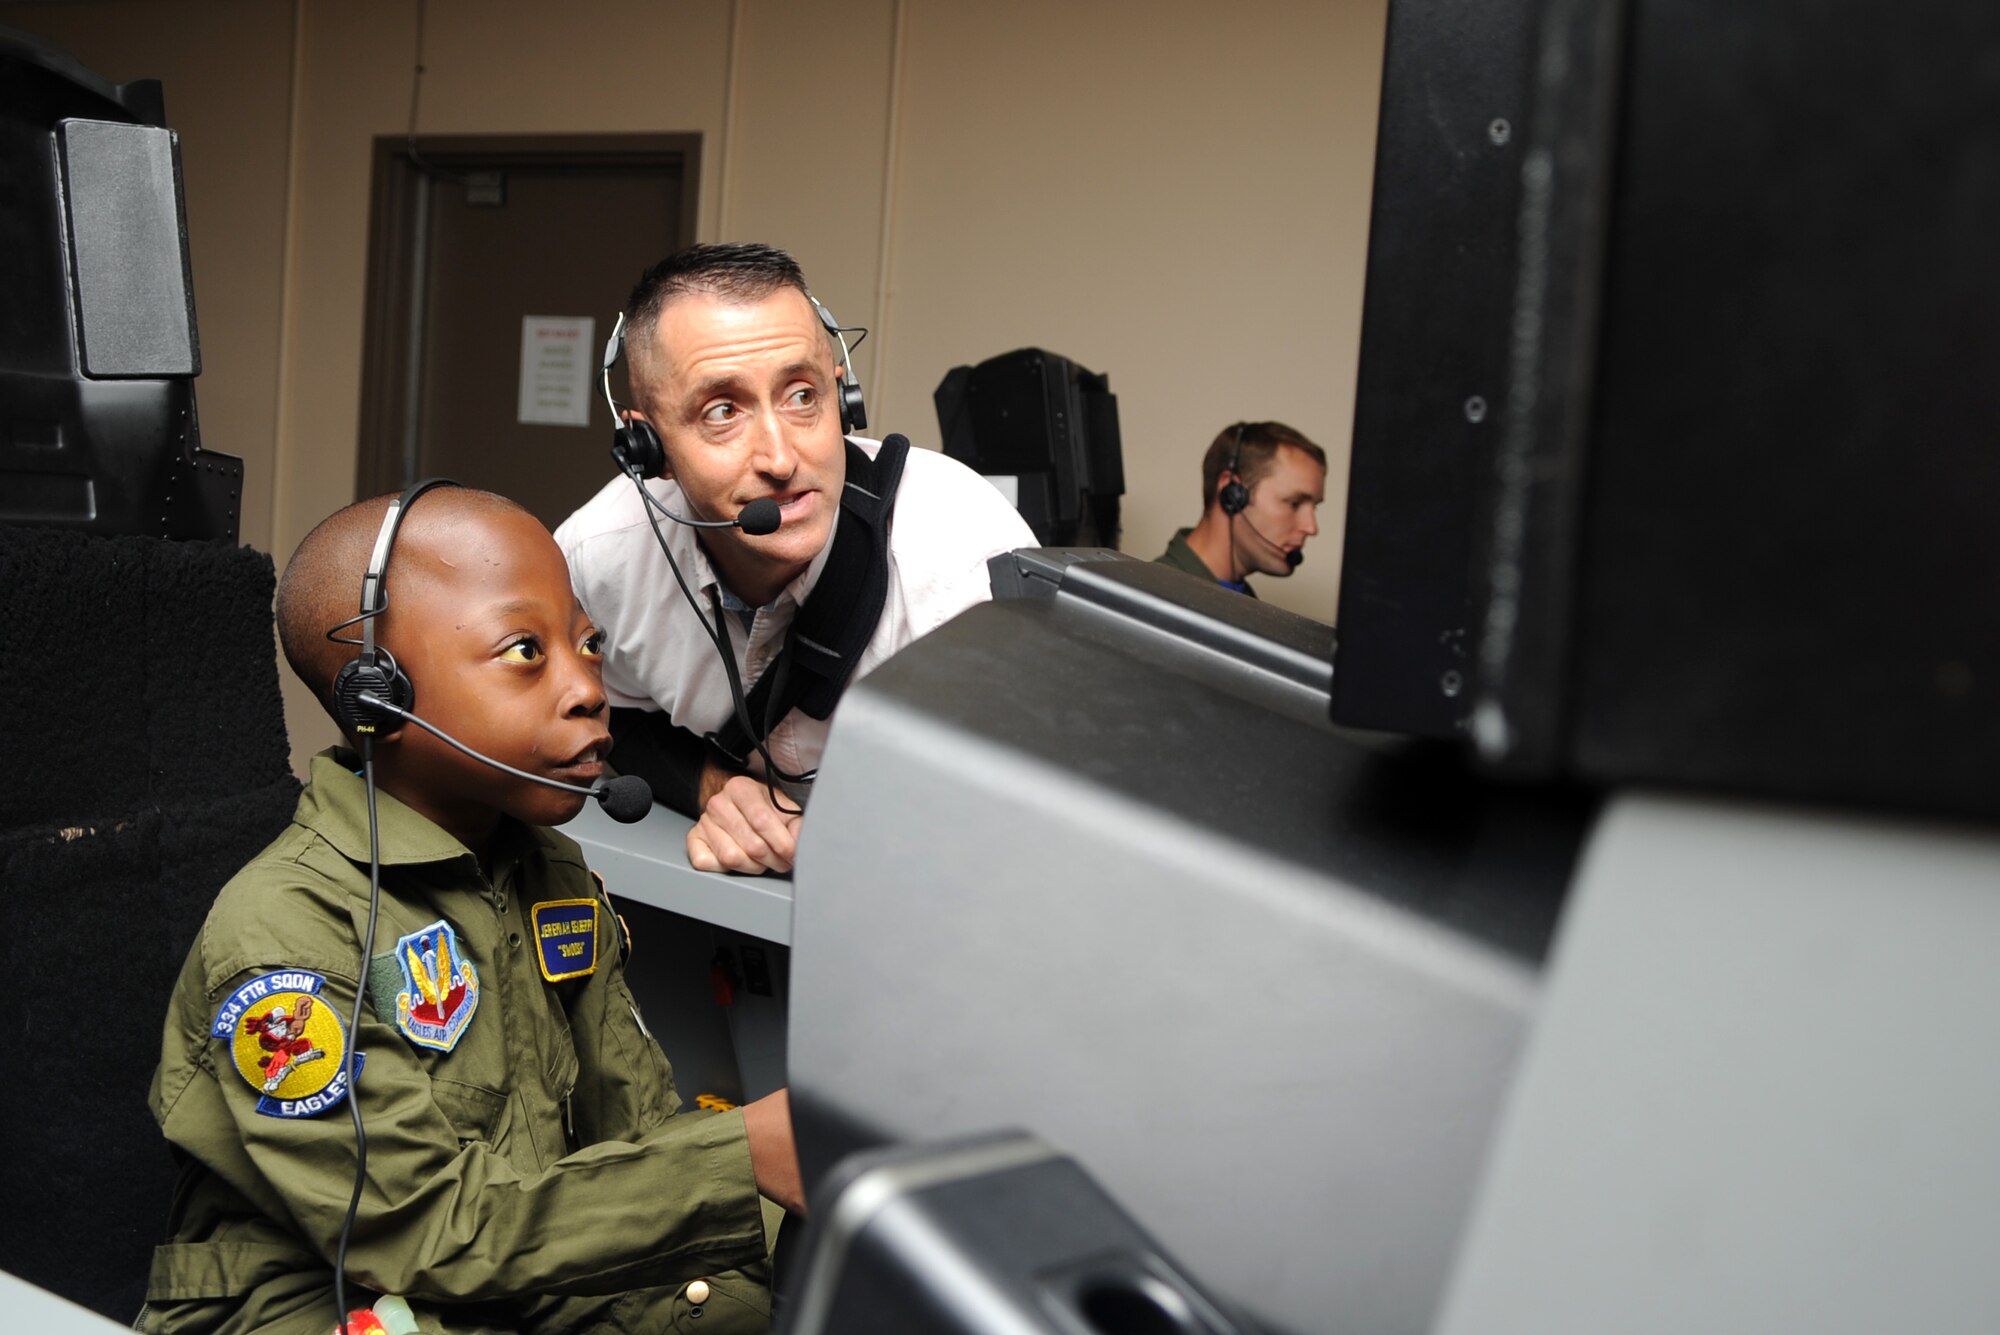 Dan Bayer, Boeing Aerospace representative, helps Jeremiah Seaberry, 334th Fighter Squadron pilot for a day, fly an F-15E Strike Eagle simulator with Capt. Adam Luber, 334th FS pilot, during a 4th Fighter Wing Pilot for a Day event, April 3, 2015, at Seymour Johnson Air Force Base, North Carolina. Luber manned the weapons systems officer position while Jeremiah “flew,” and was thrilled at how well Jeremiah performed. (U.S. Air Force photo/Senior Airman Ashley J. Thum)